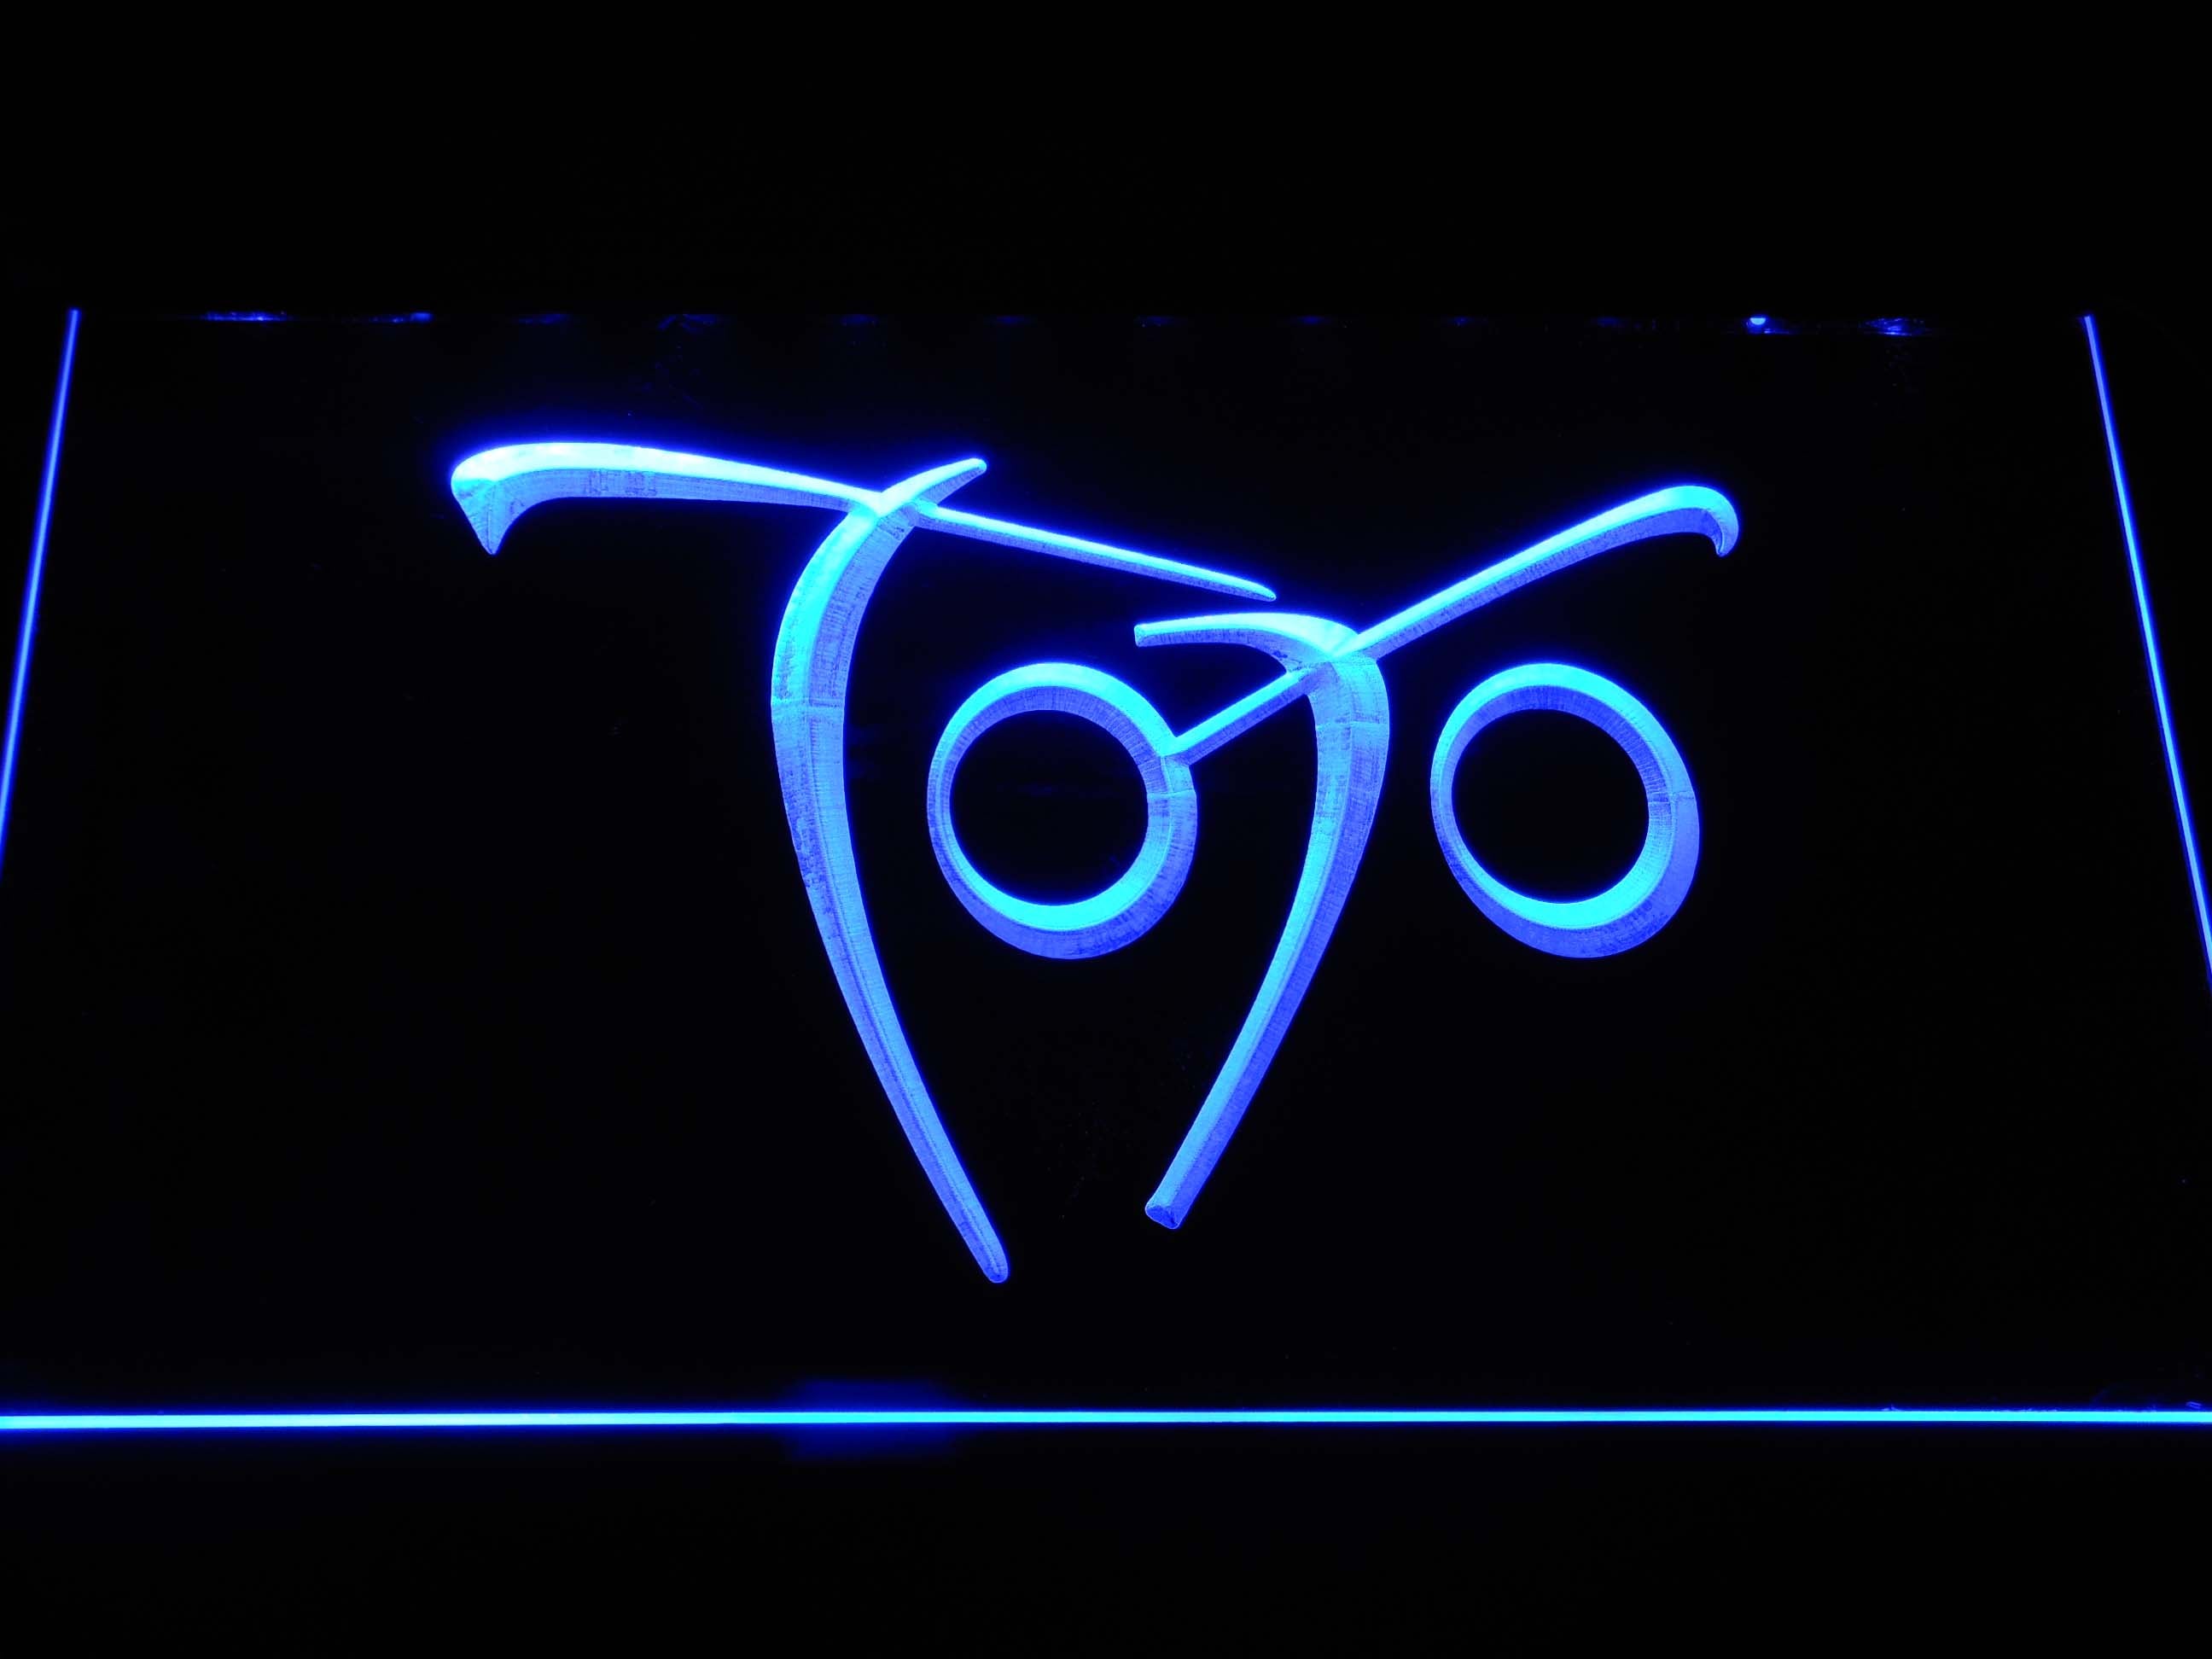 Toto Music Band LED Neon Sign